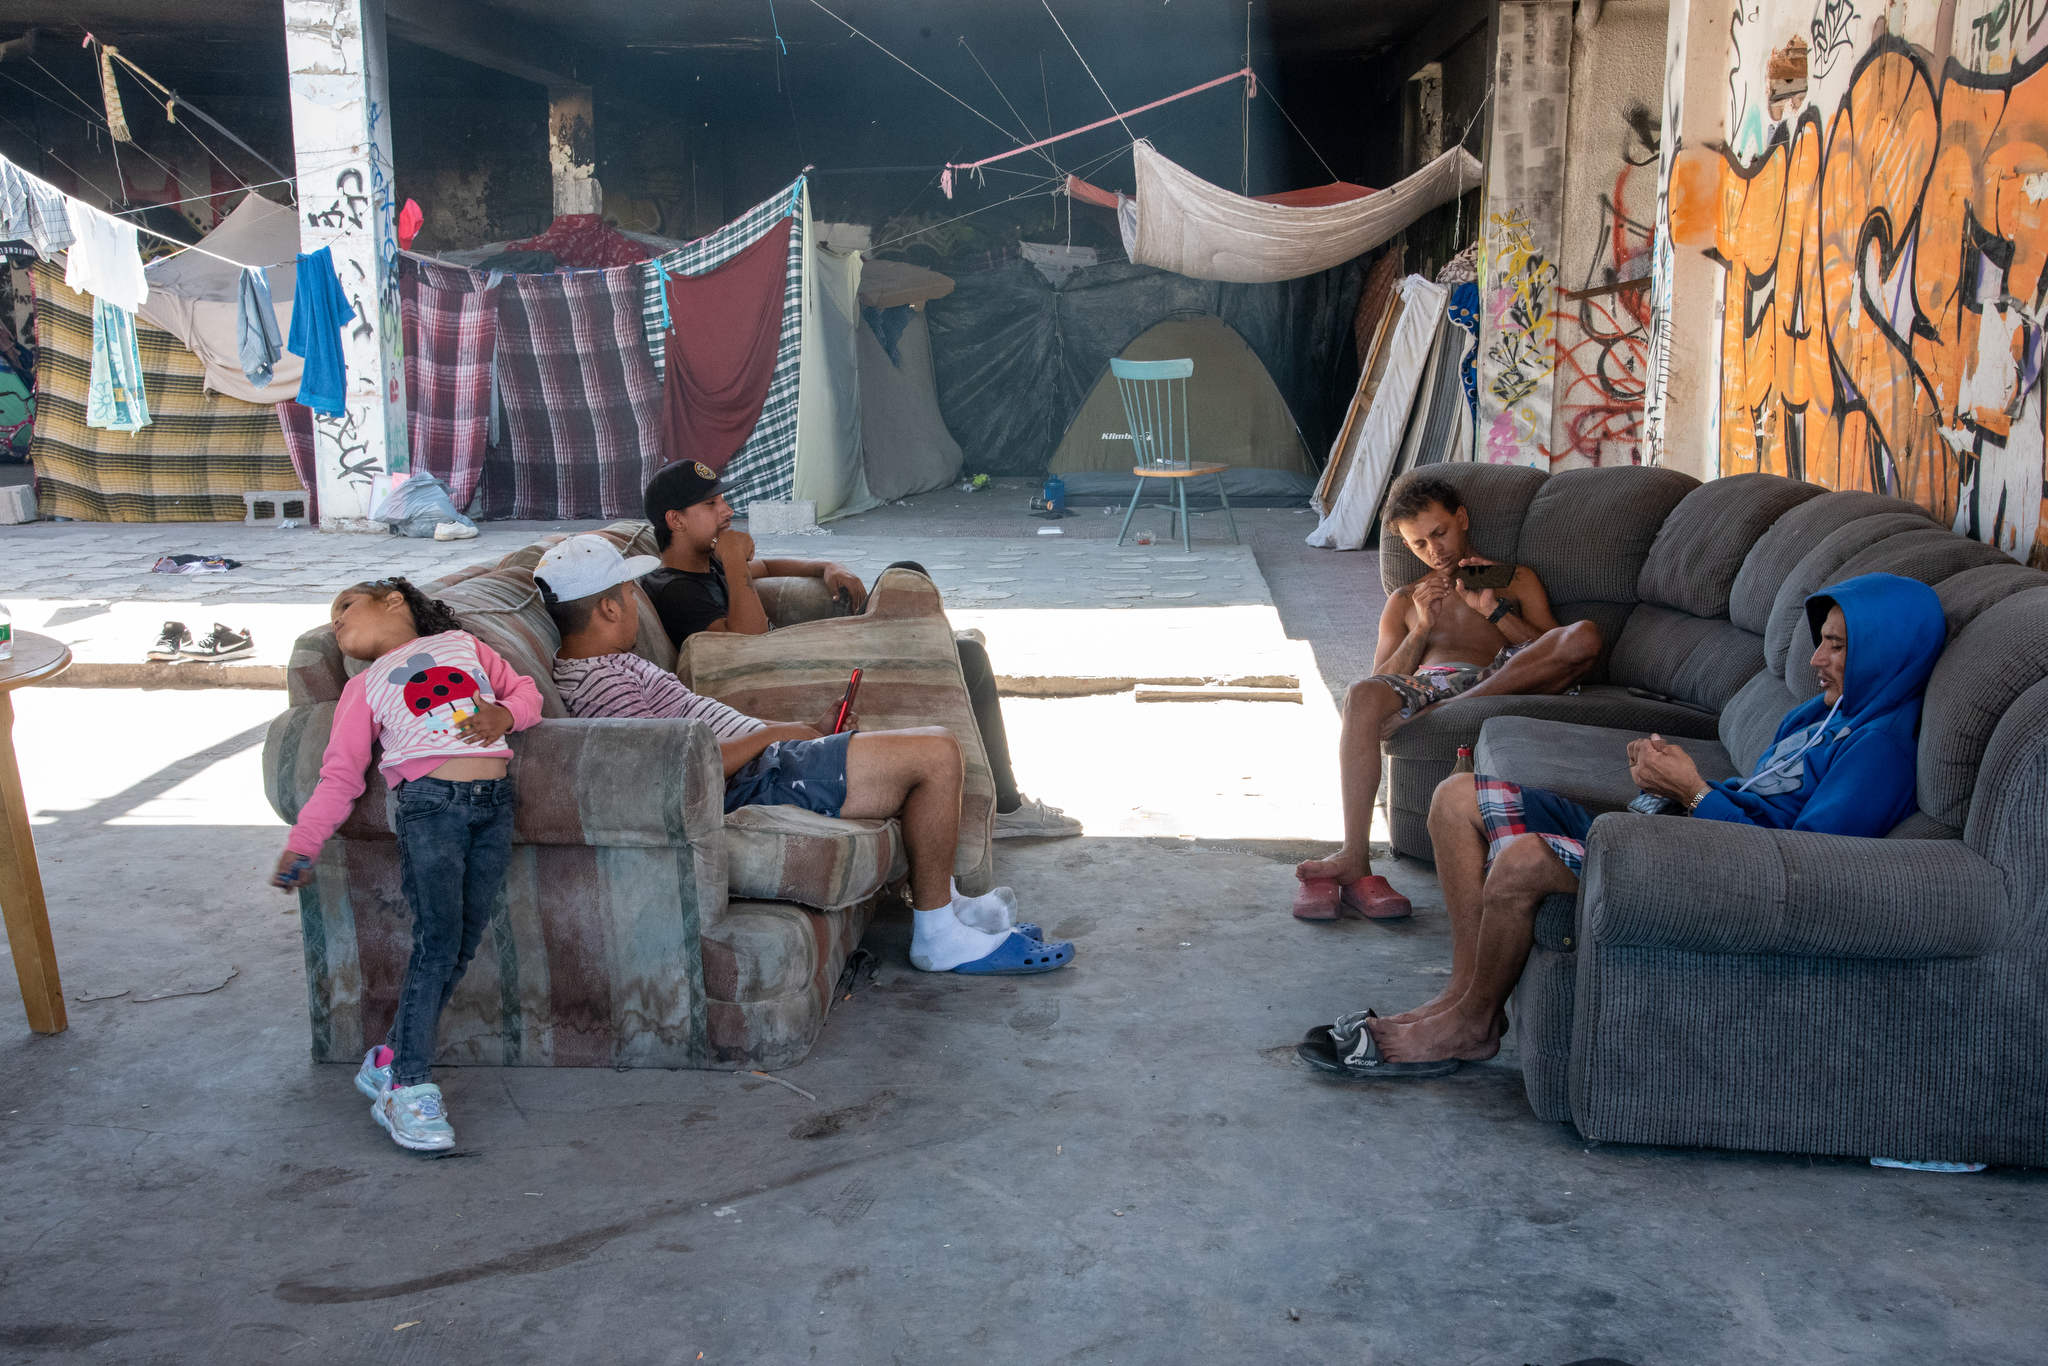 A group of people sit, some shirtless, using their phones on dirty abandoned couches in the graffiti-covered ruins they call their temporary home. Rooms are made with hanging fabric in the background.